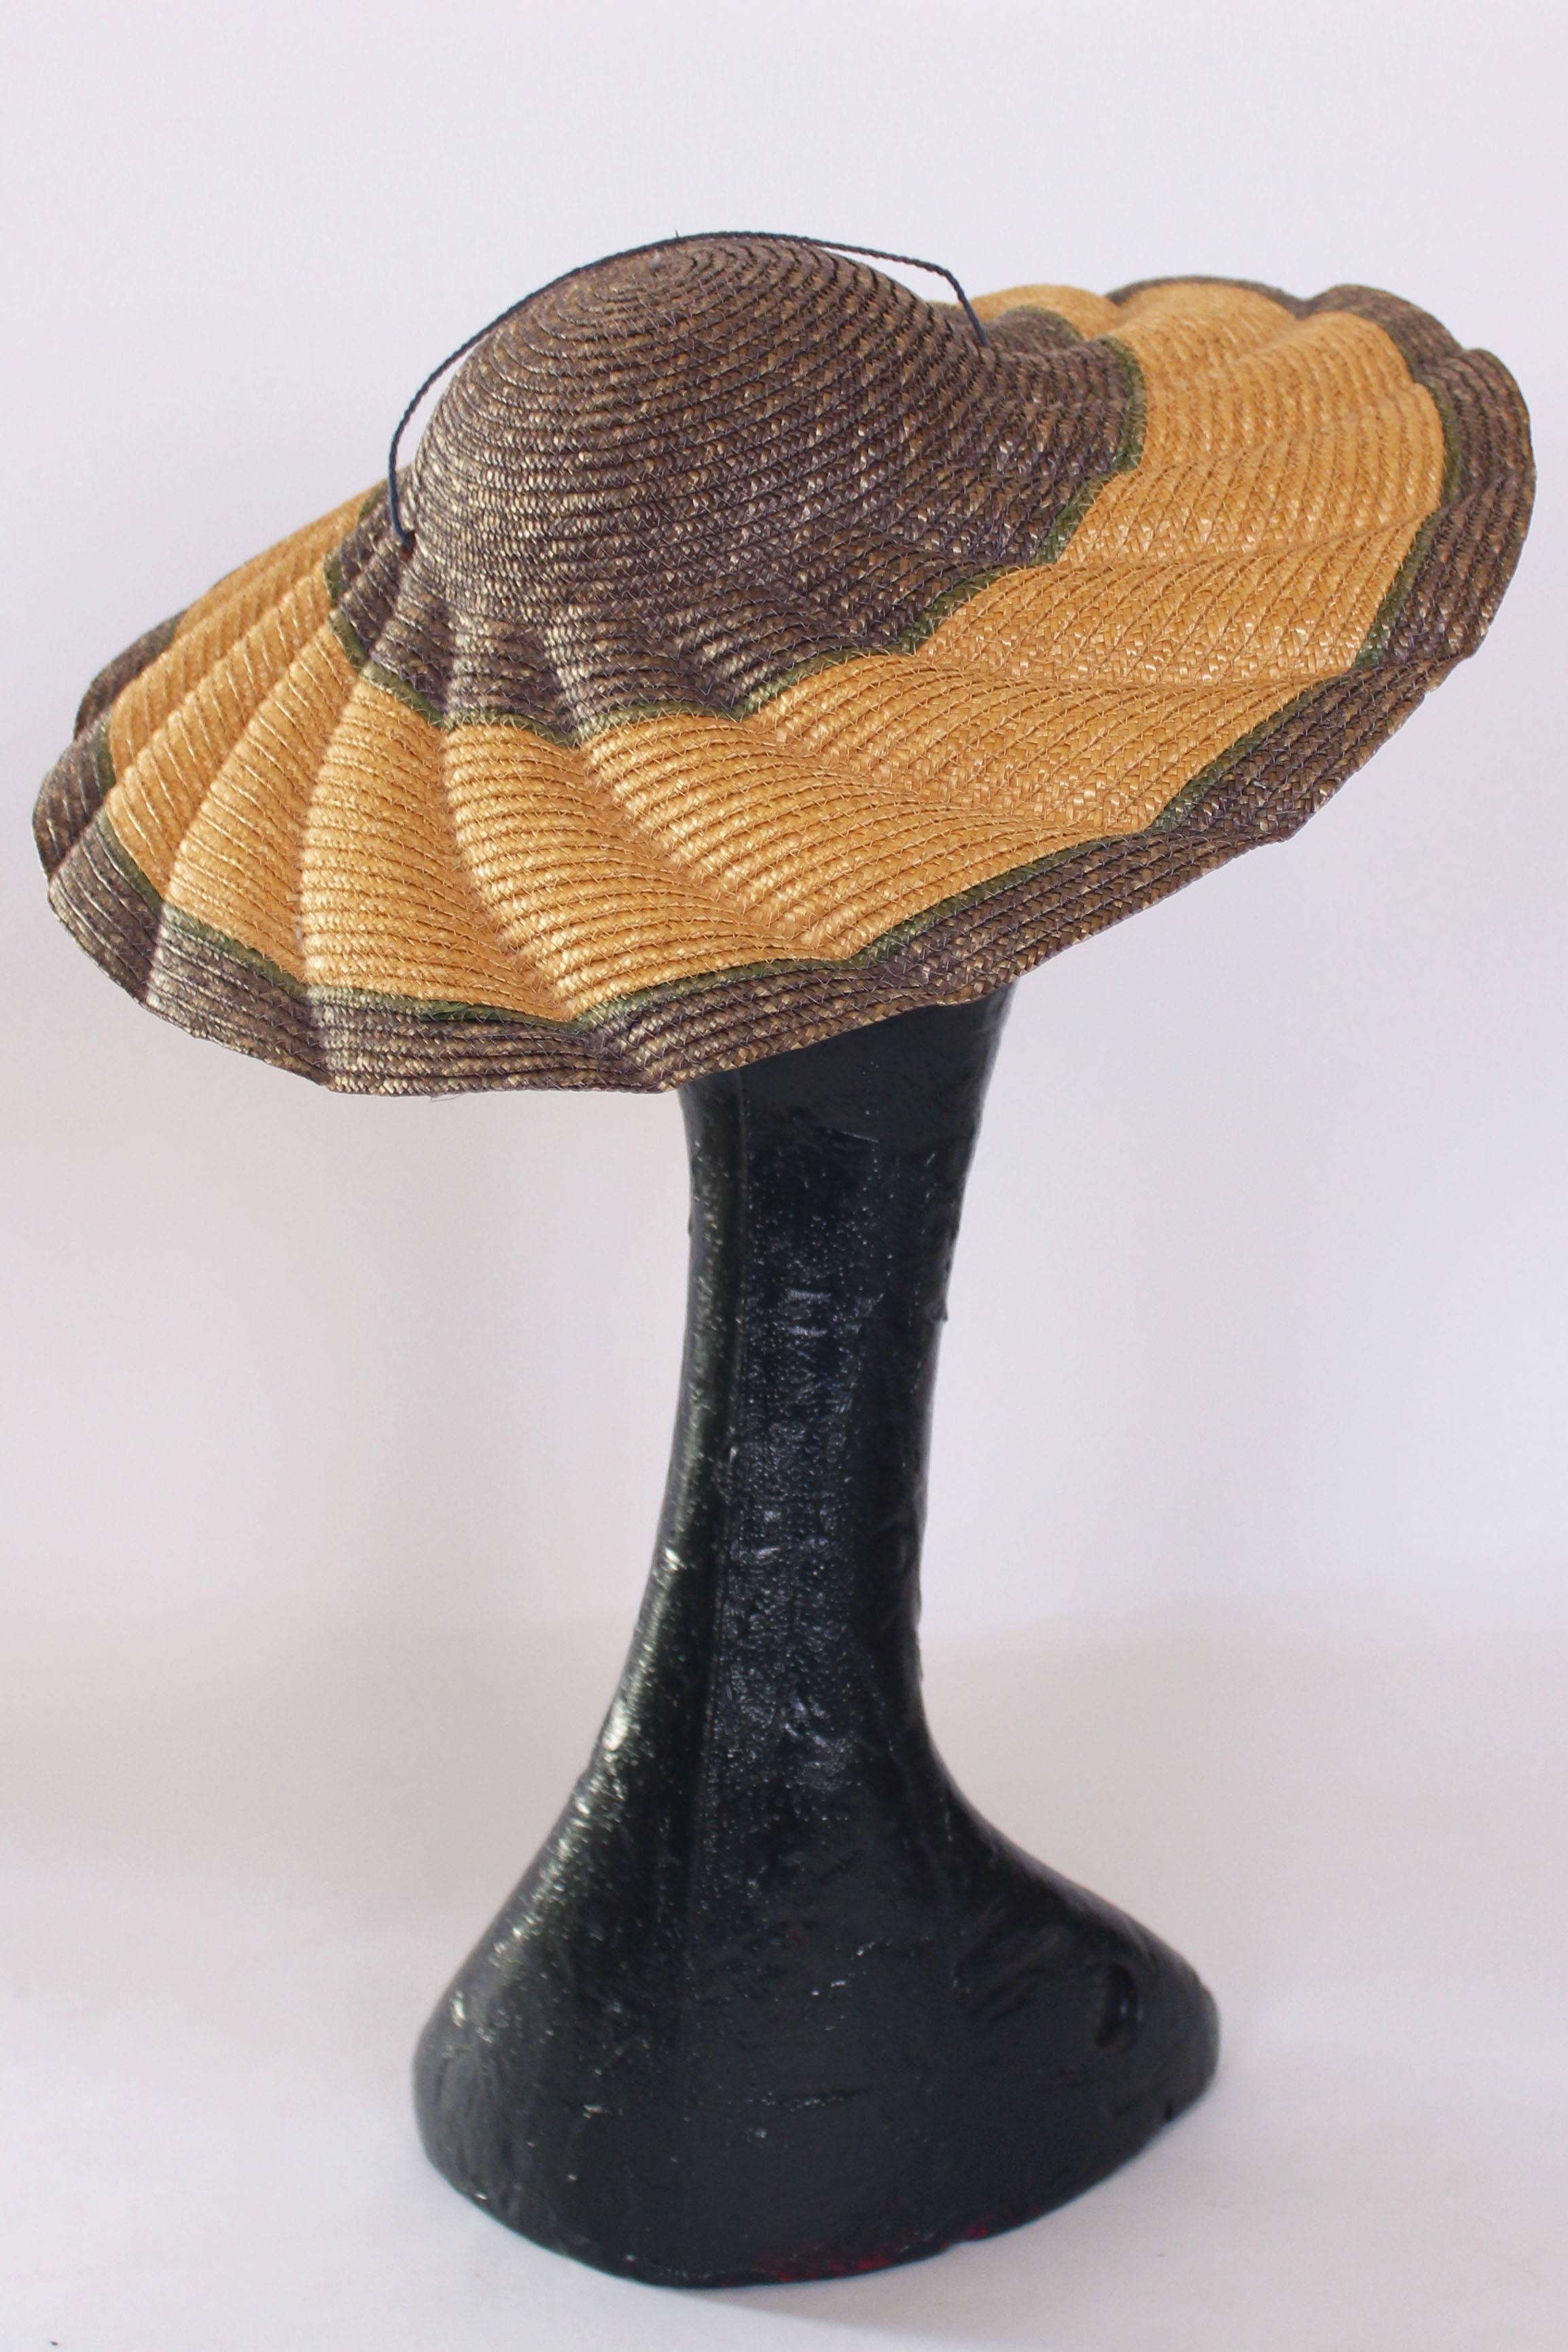 This would be a great hat for a wedding or summer events. The hat is a wonderful mix of soft colours; mauve, green and natural stripes. The sape is  lovely scalloped brim which looks like waves. It has quite a shallow crown so has a ribbon/string